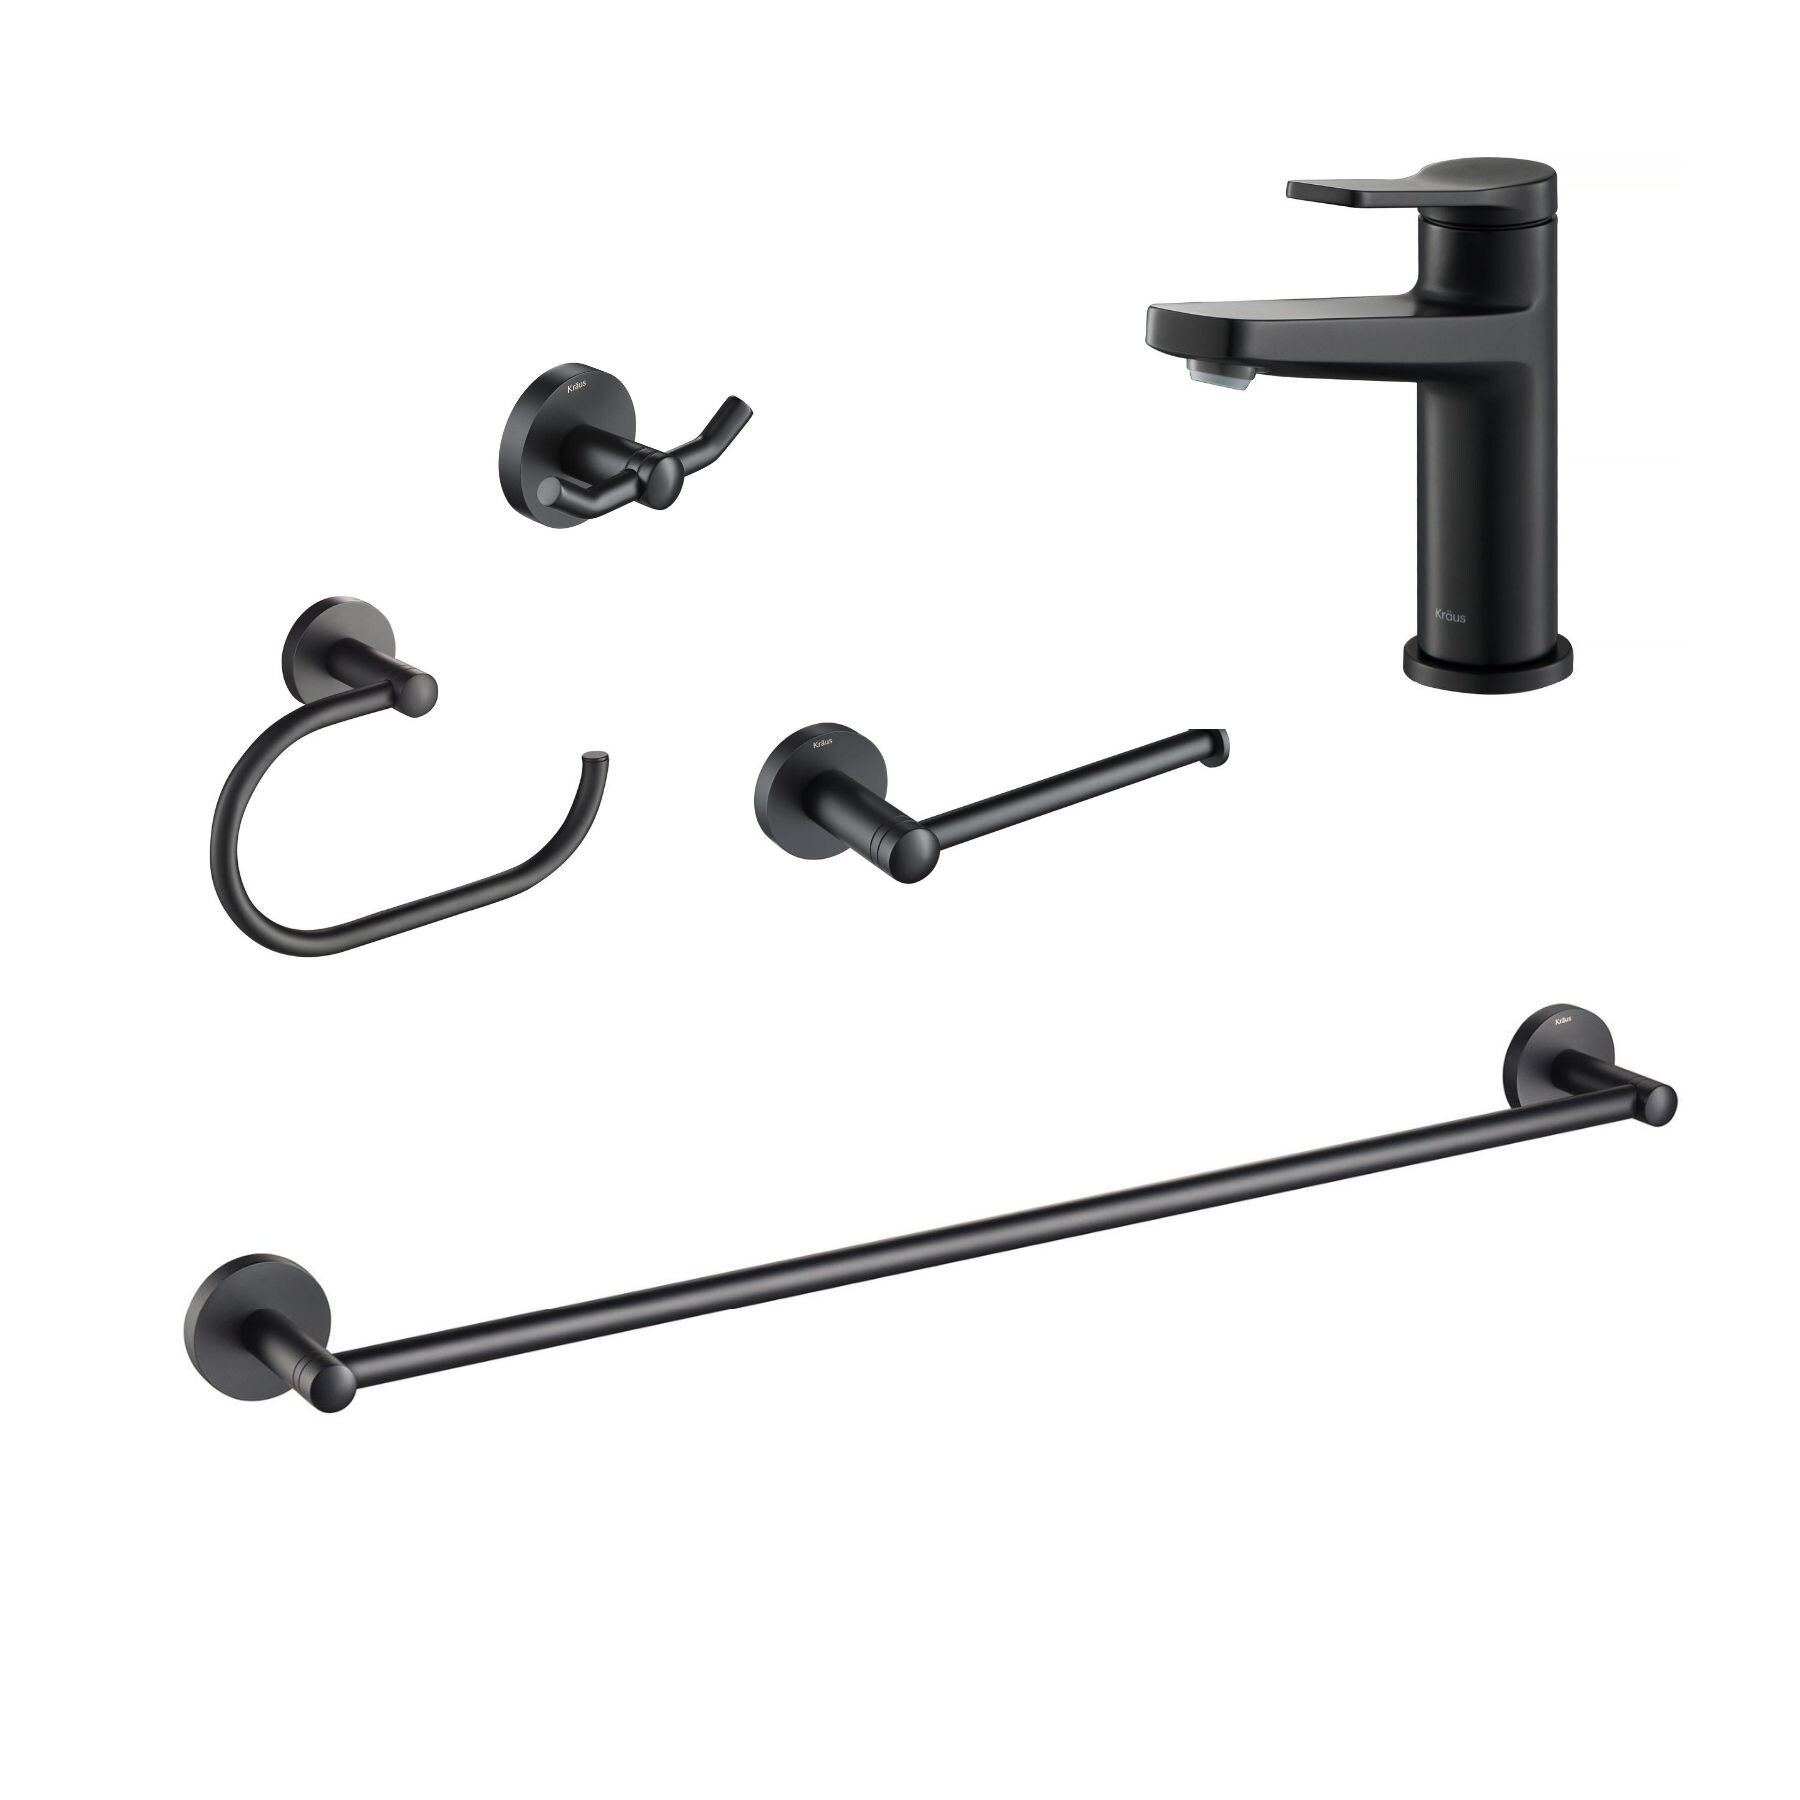 Bathroom Accessories & Hardware at Lowe's